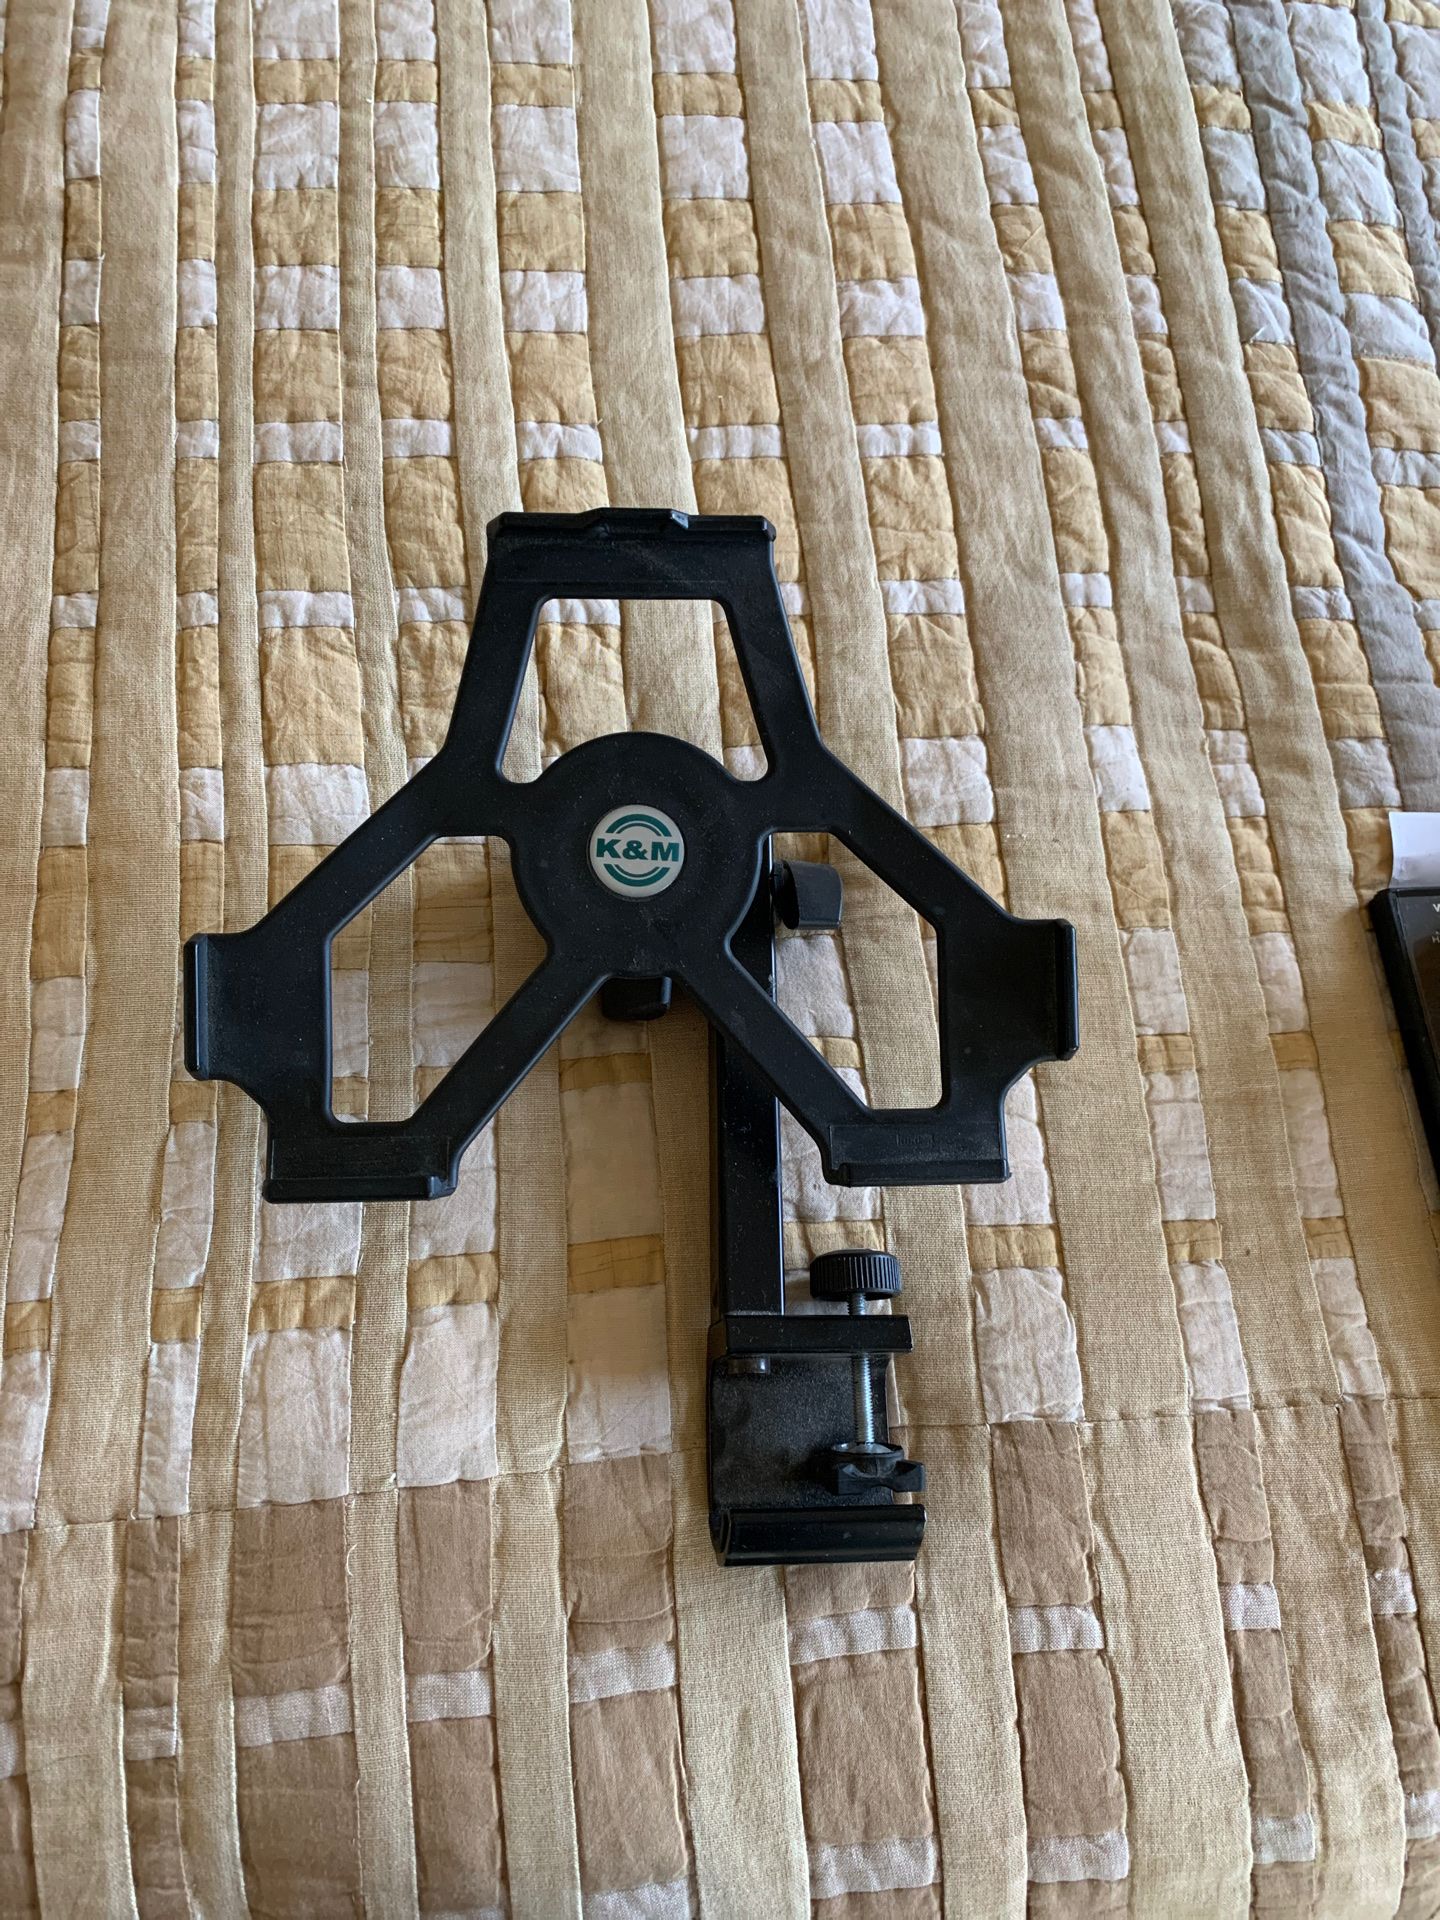 iPad holder connects to mic stand